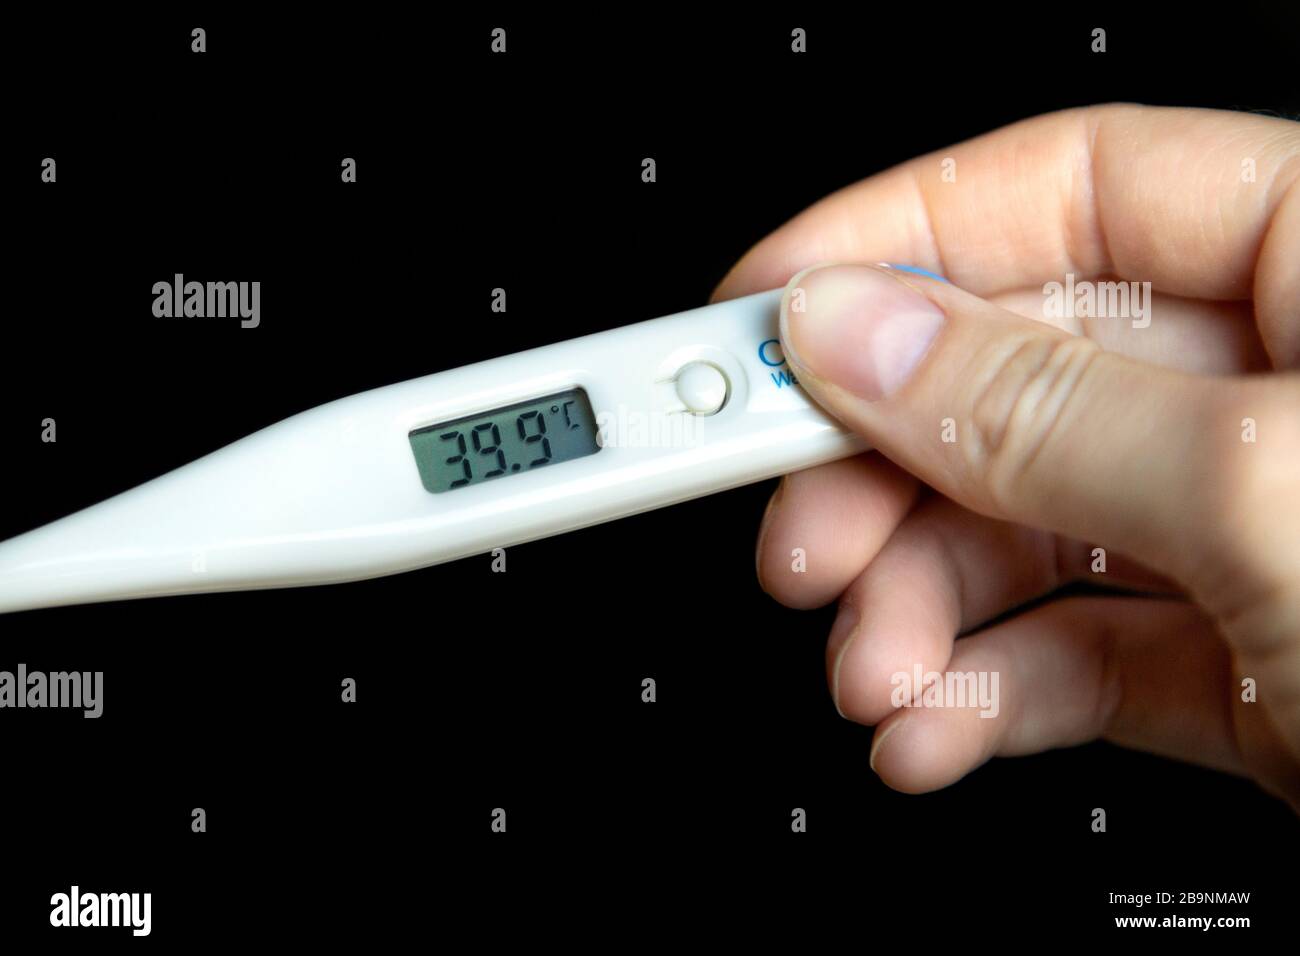 Hand holding a thermometer showing high fever of 39.9 °C Stock Photo